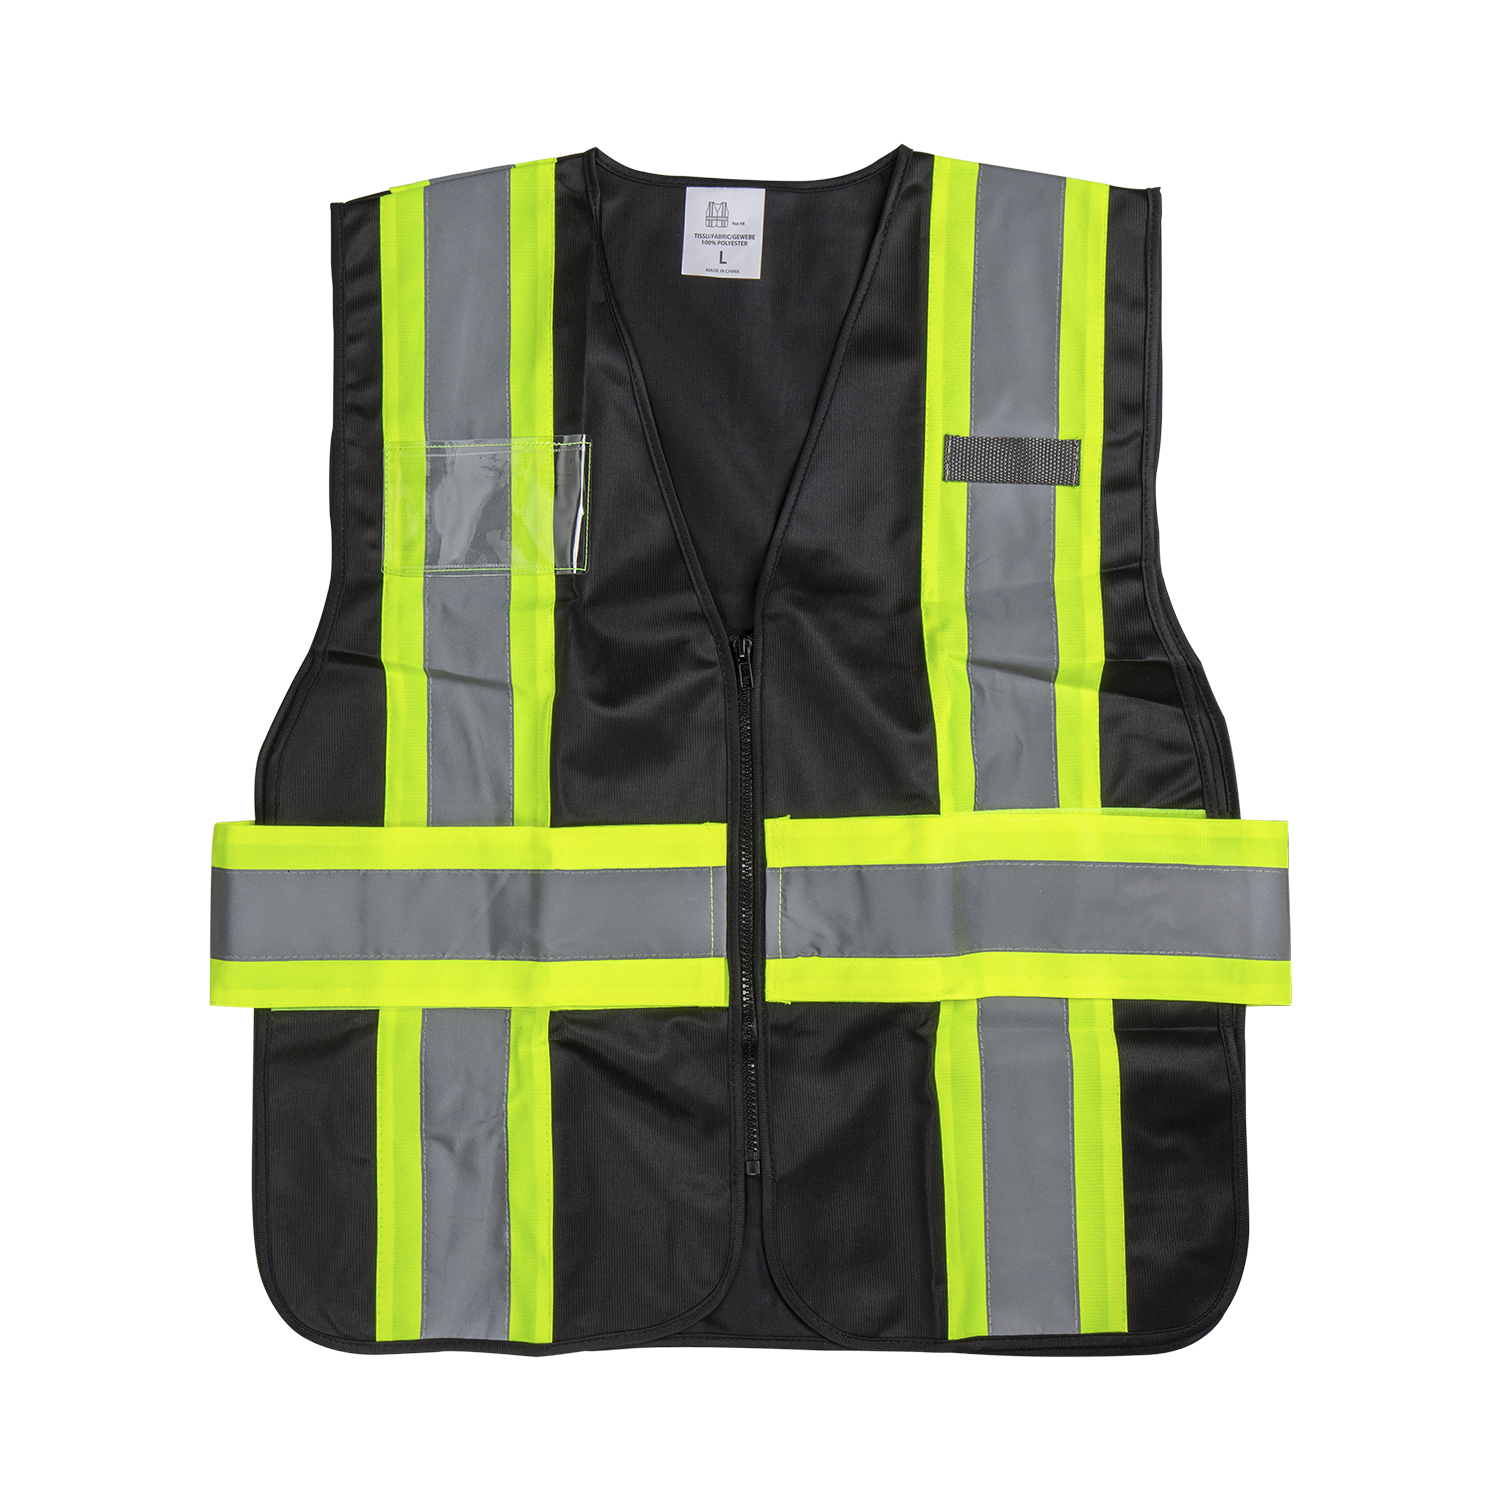 Safety work trousers, black/grey/yellow